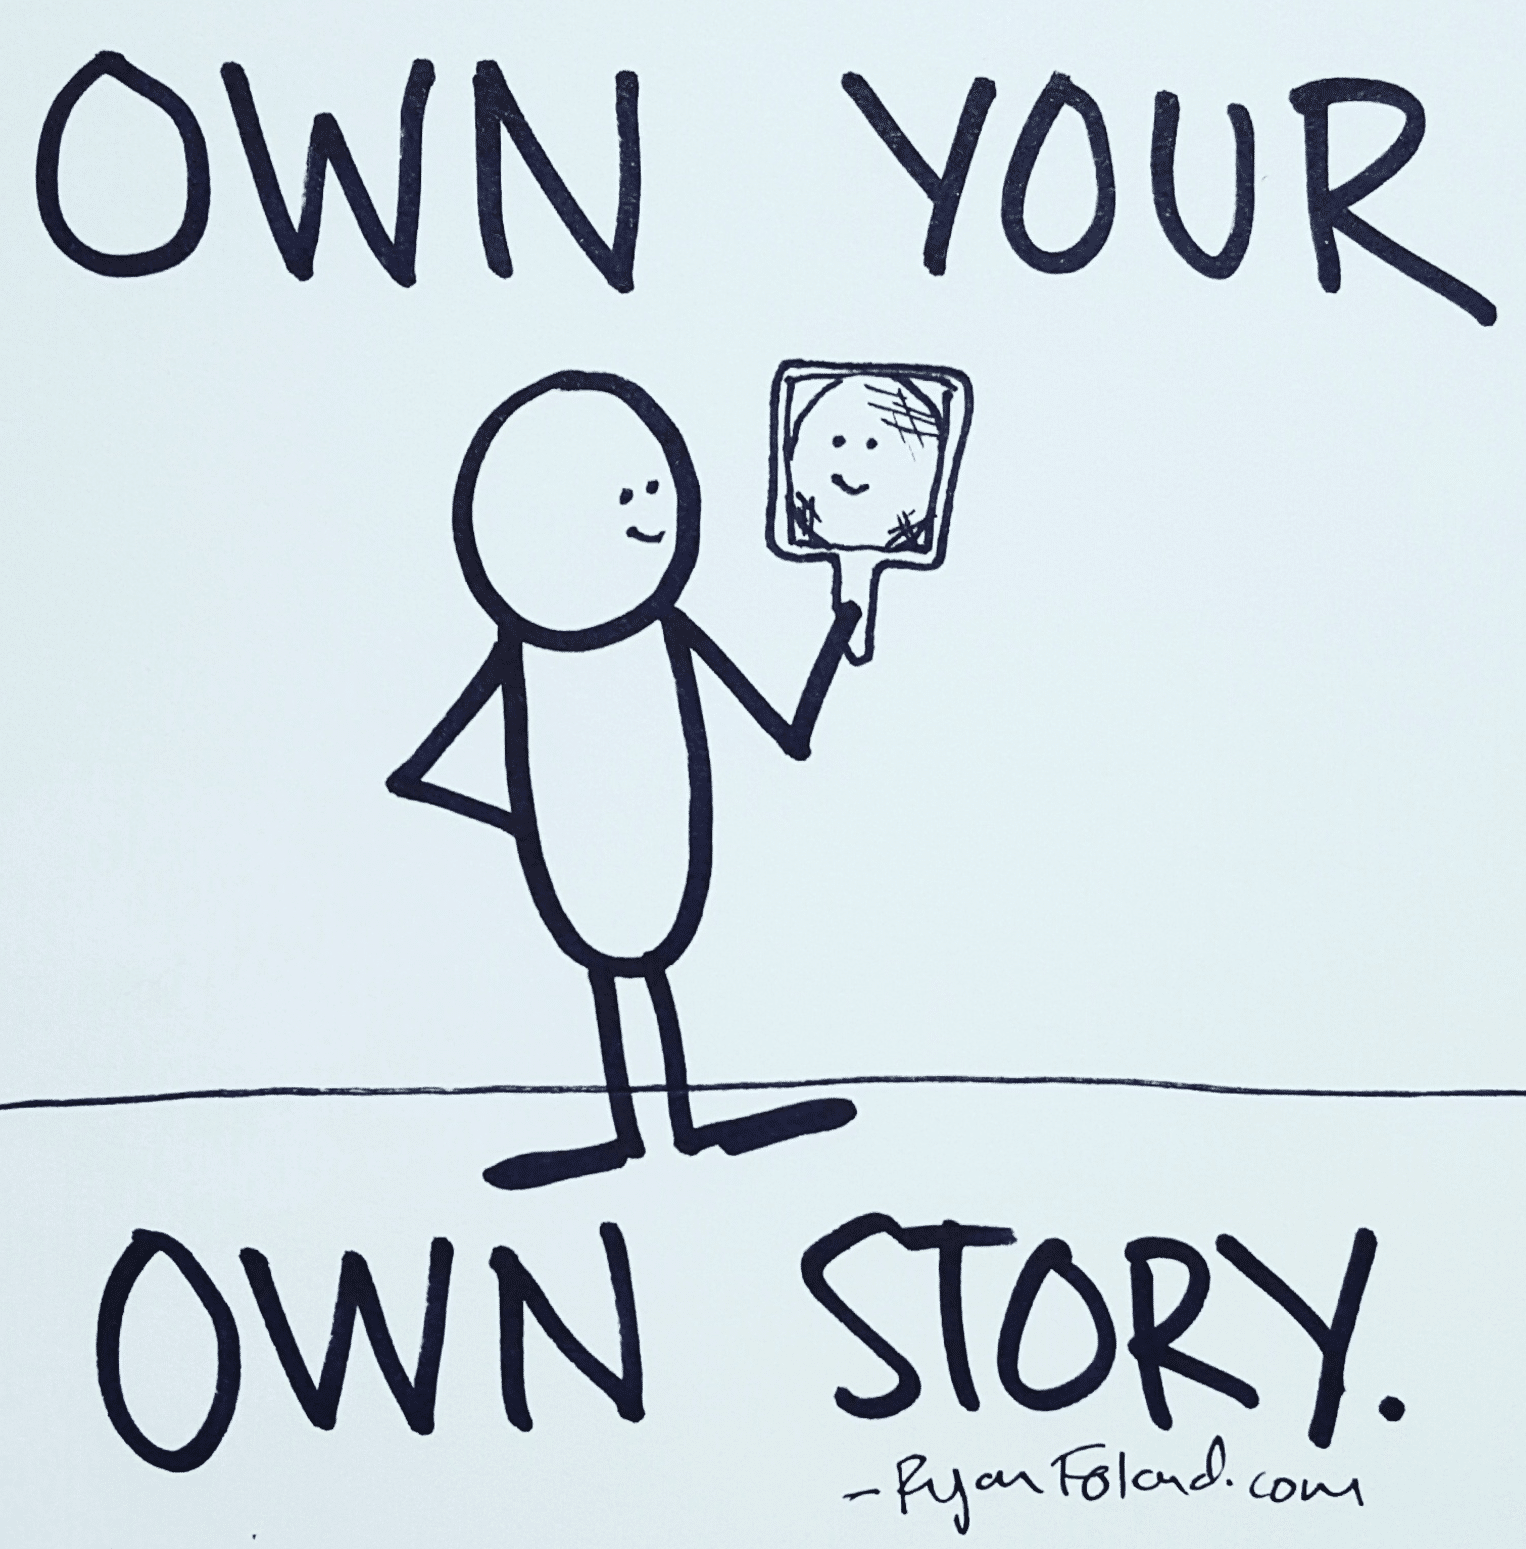 Own you own story, quote by Ryan Foland